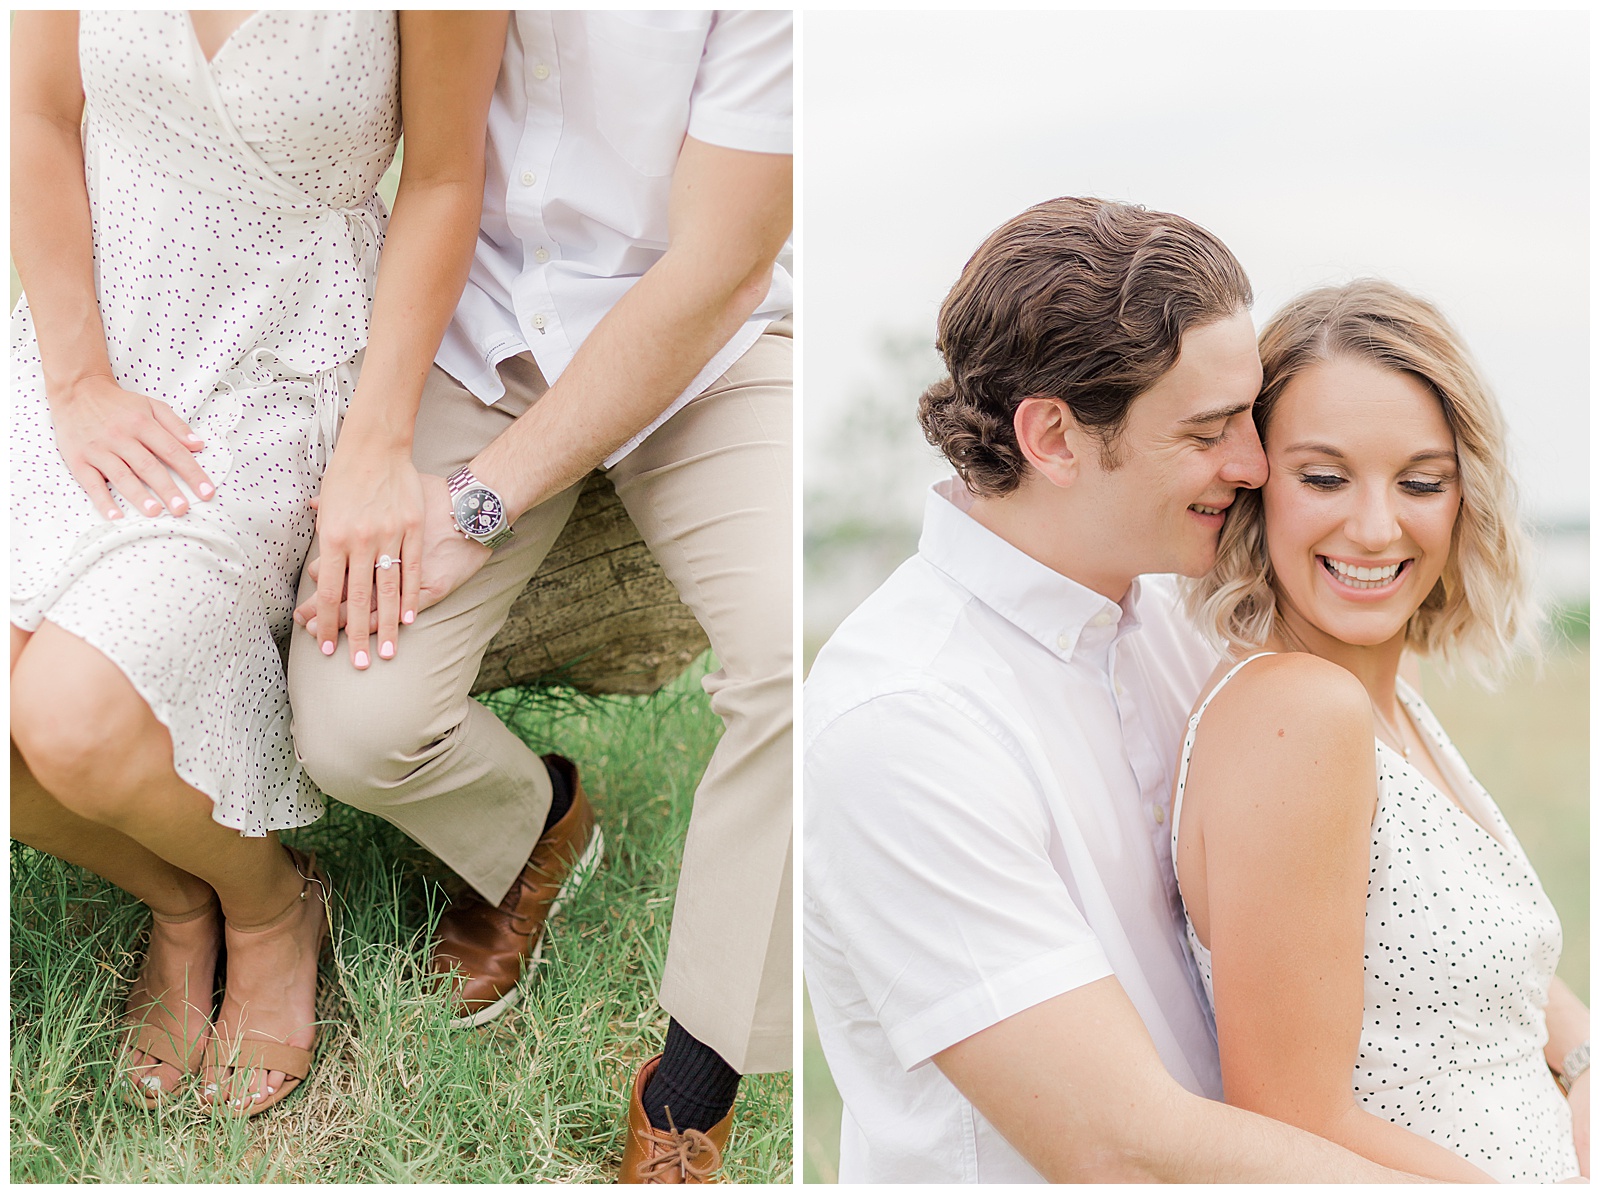 White and tan engagement outfit inspiration